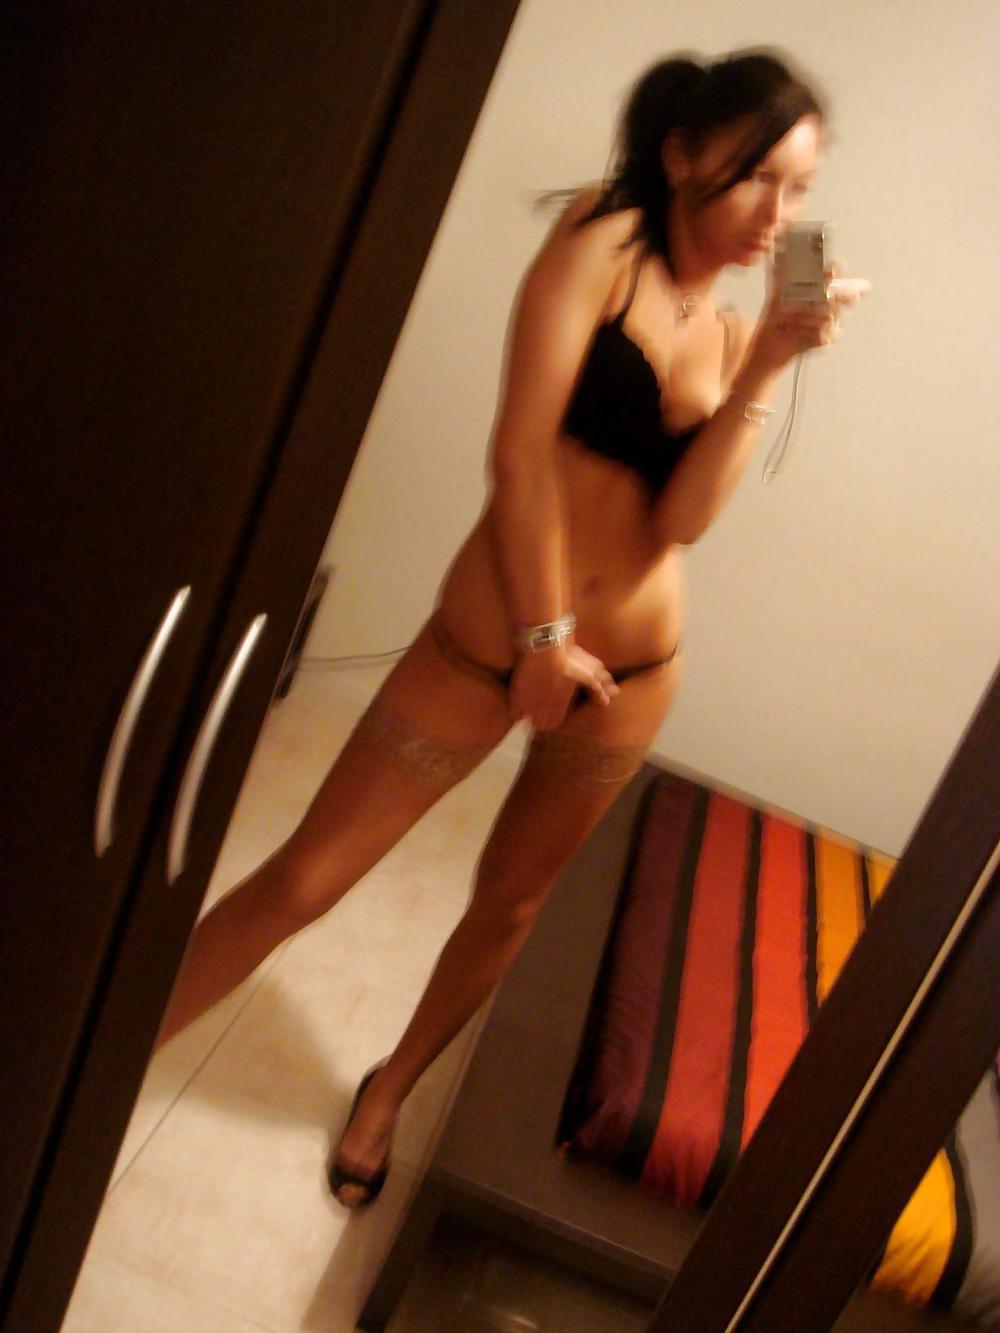 one of my favorite self shot girls porn pictures